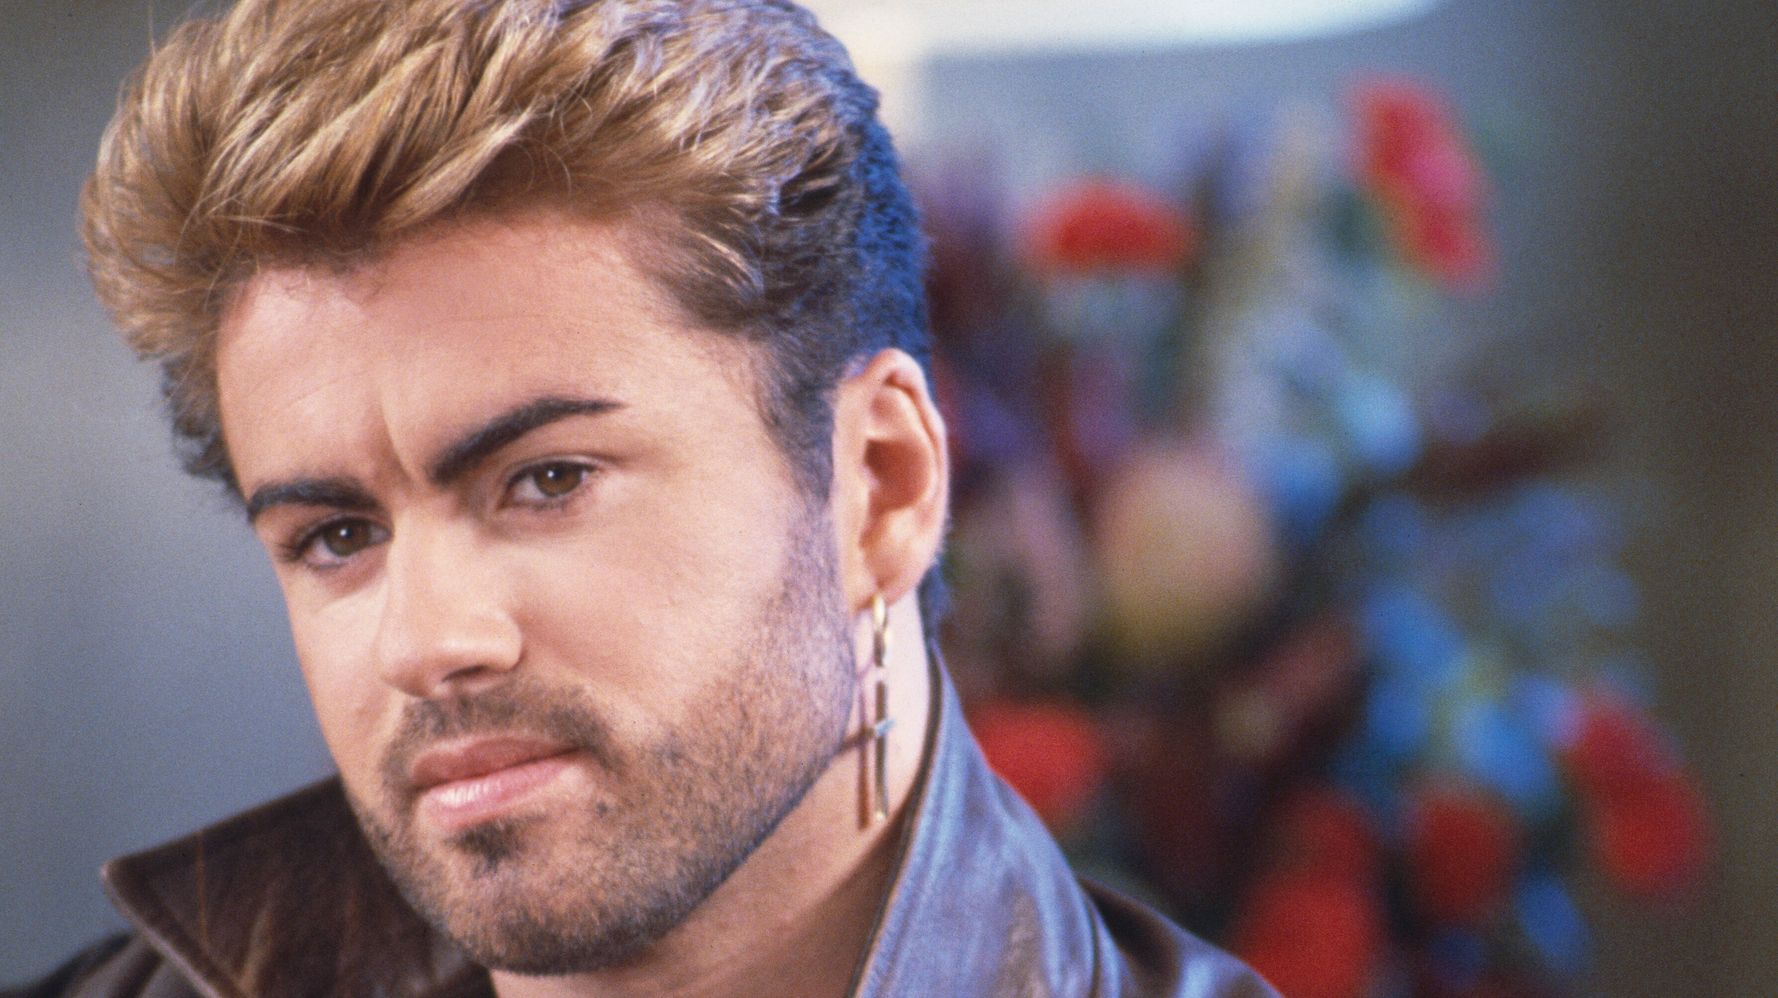 New Documentary Finally Gives George Michael A Chance To Tell His Own Story